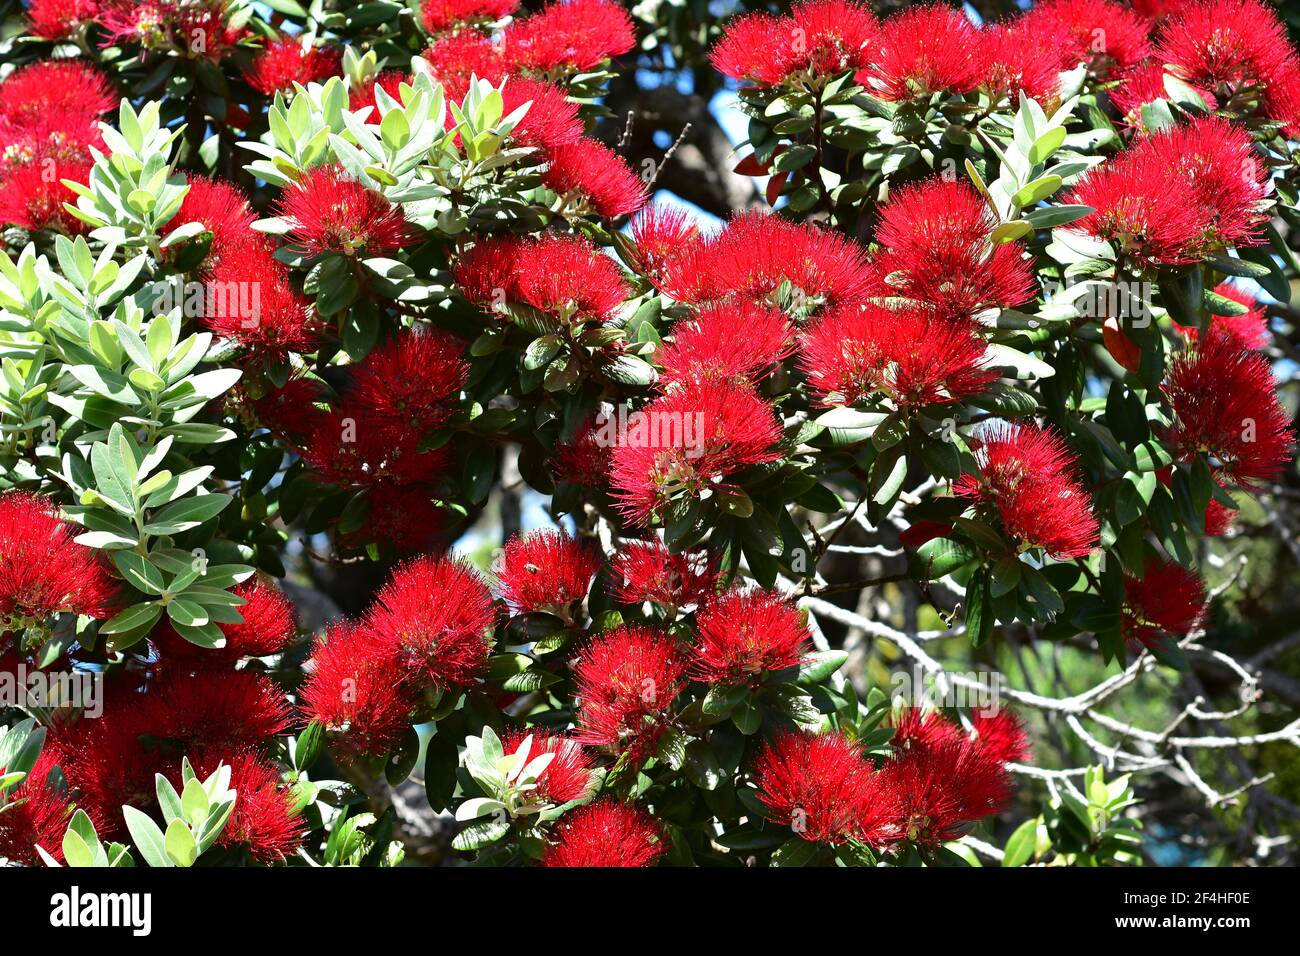 Display of bright red pohutukawa blossoms among small hard leaves in sharp light. Stock Photo